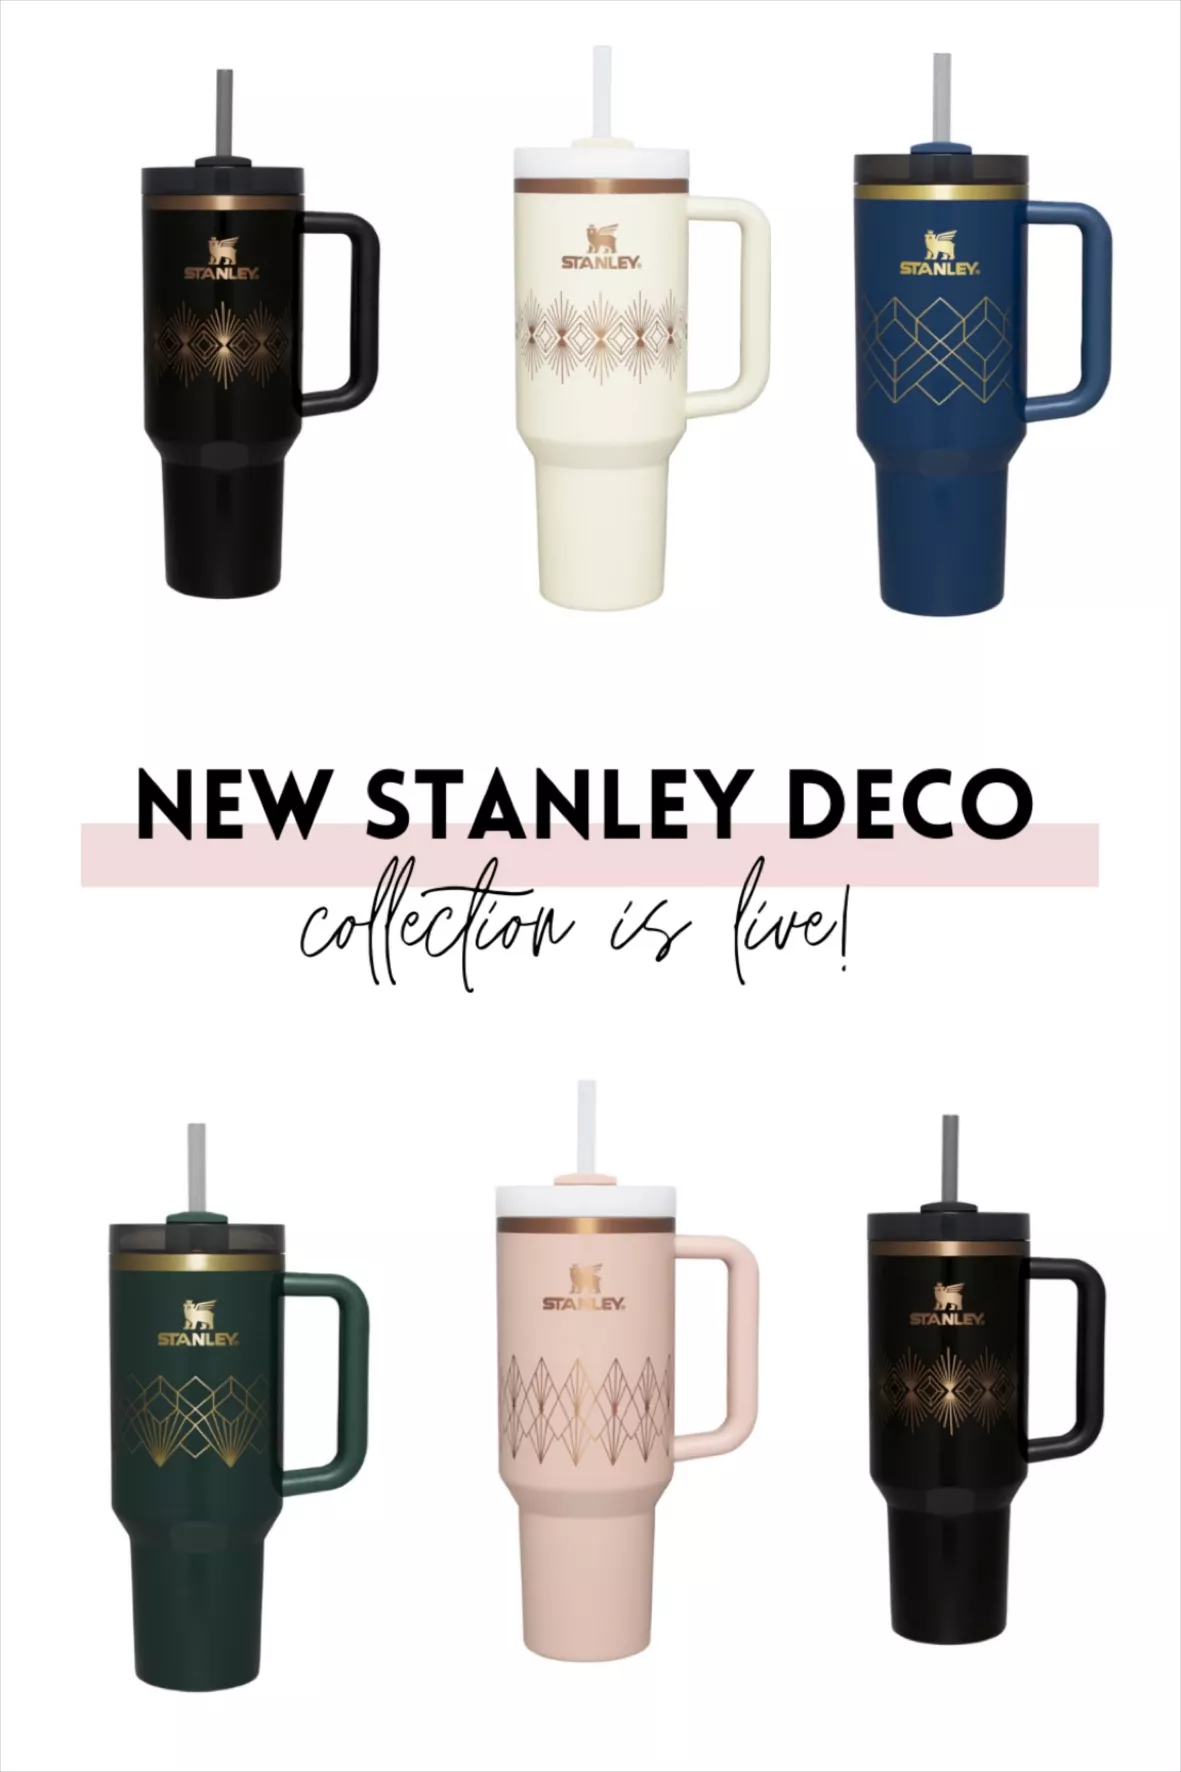 Stanley just released a Quencher deco collection